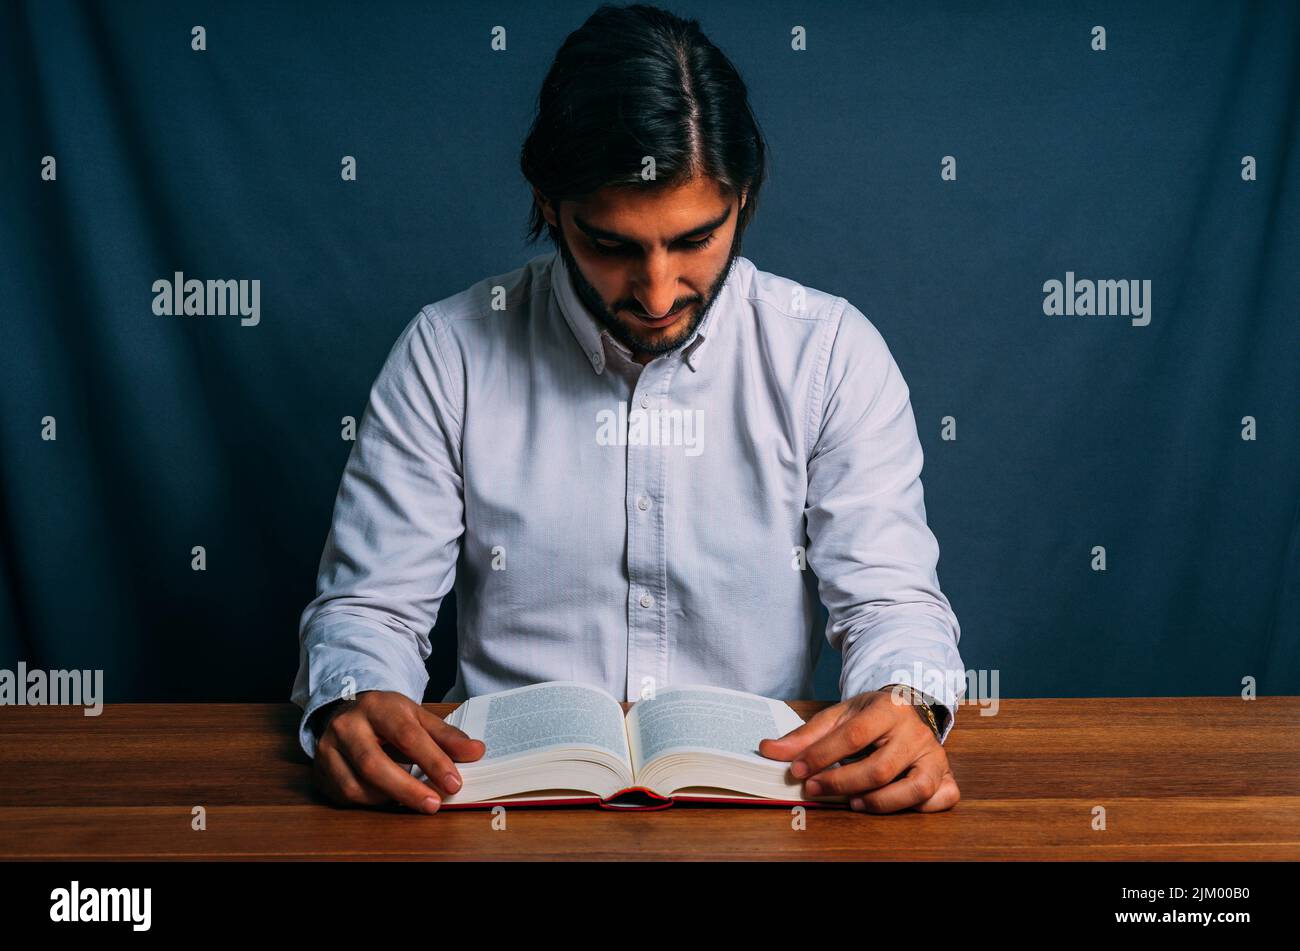 Picture of Stylish Hispanic Man in Striped Shirt Studying Concentrate a Big Book Sitting at a Wooden Table. Concept of Studying Hard Stock Photo